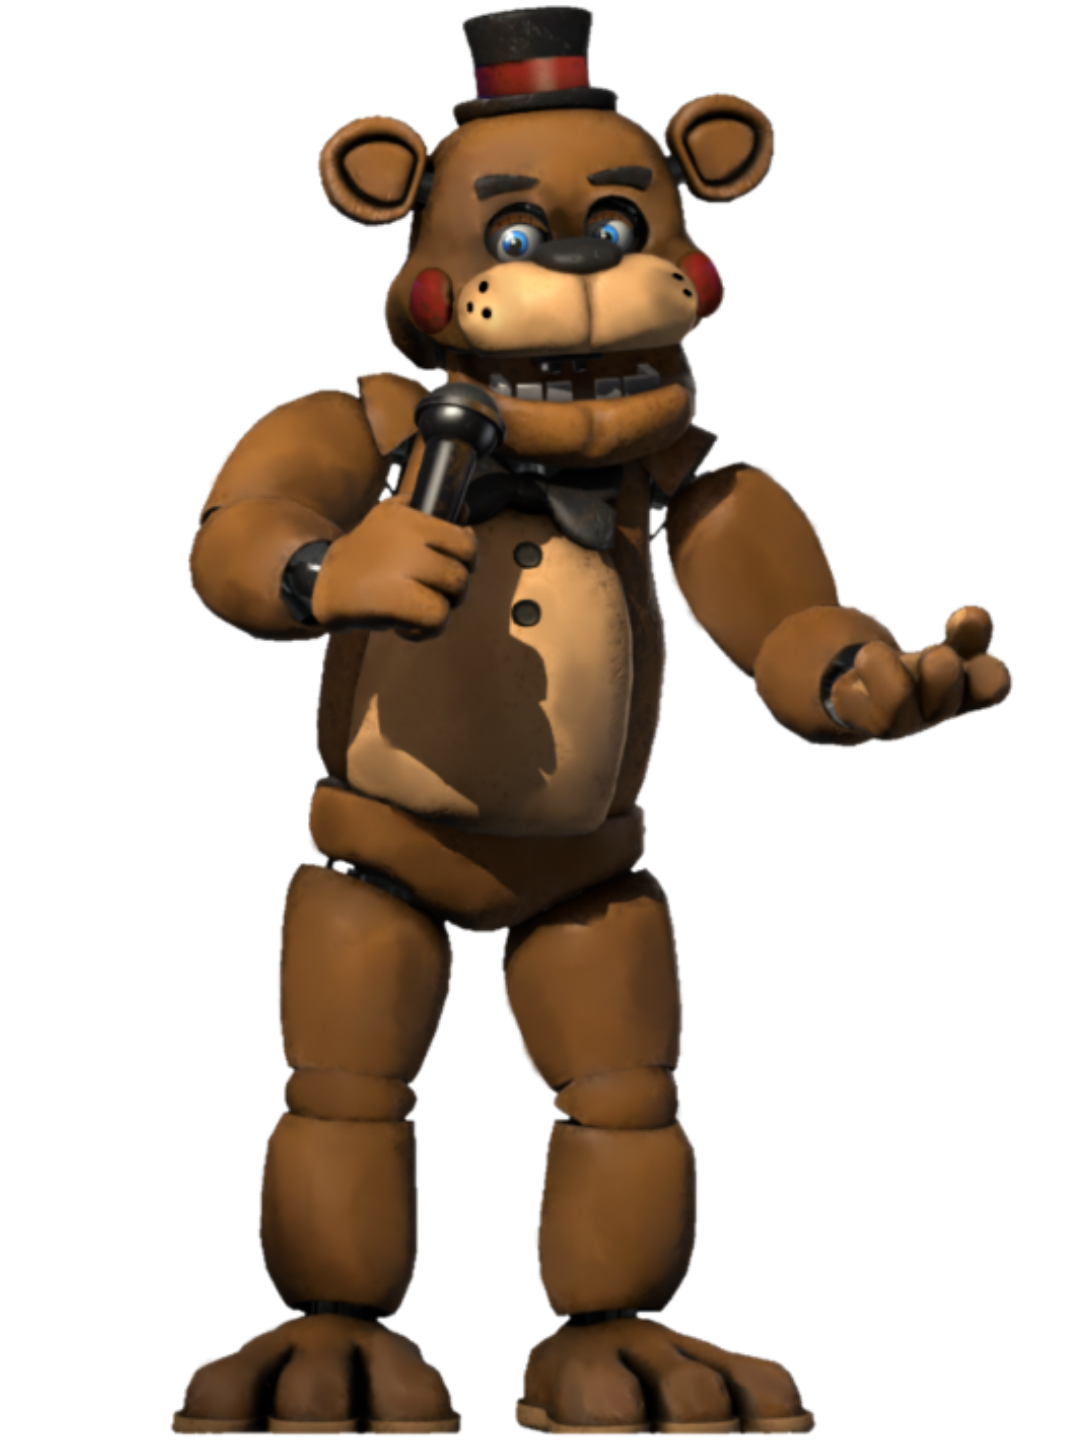 Fixed Withered Chica by GaragaYT on DeviantArt